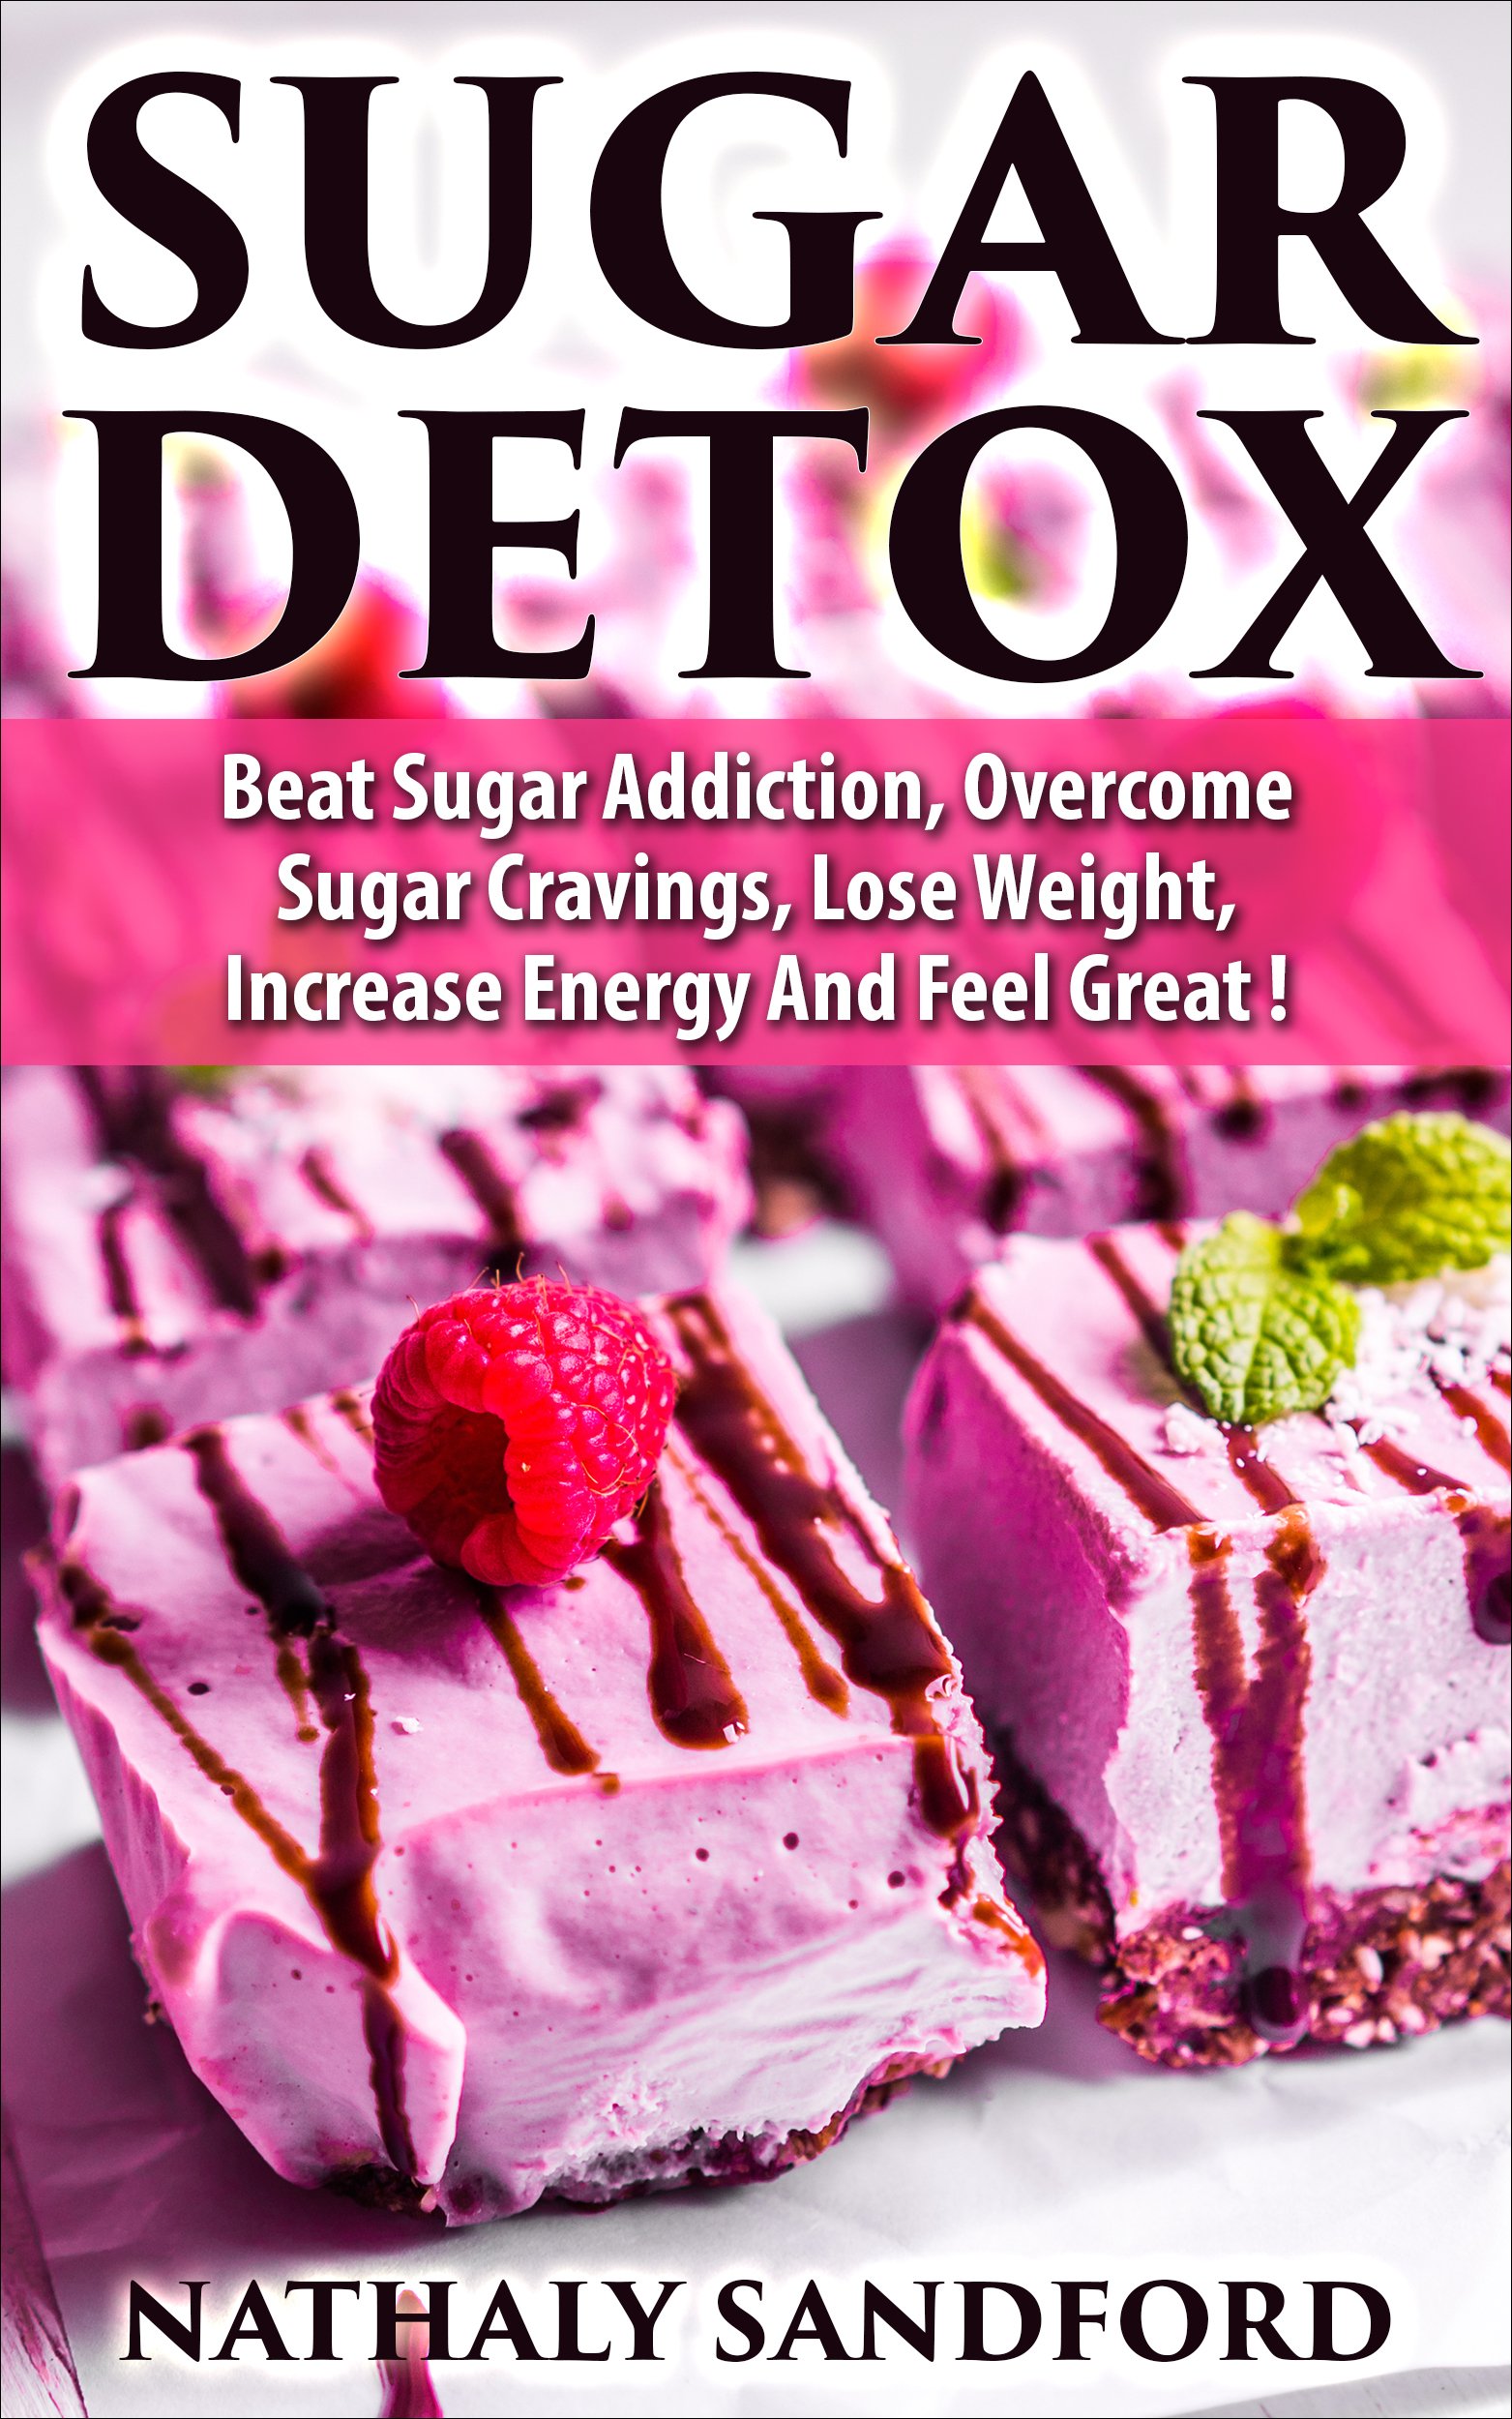 Buy Stop Sugar Cravings: How to Overcome Sugar Addiction for Life ...